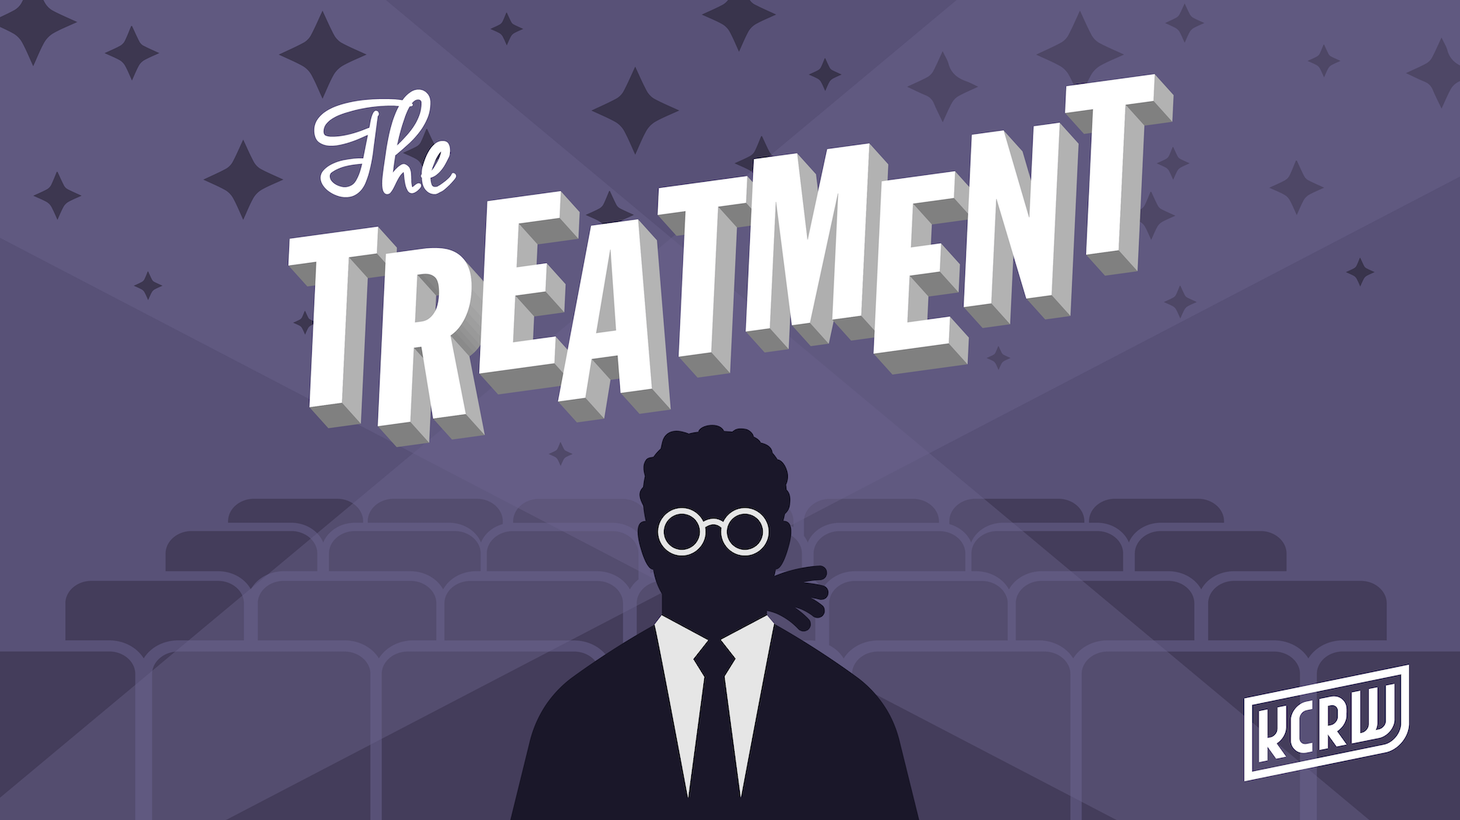 Film critic Owen Gleiberman visits The Treatment to discuss his roots in film analysis as movies helped him feel "connected" during childhood. He explains this and more in his new book Movie Freak.